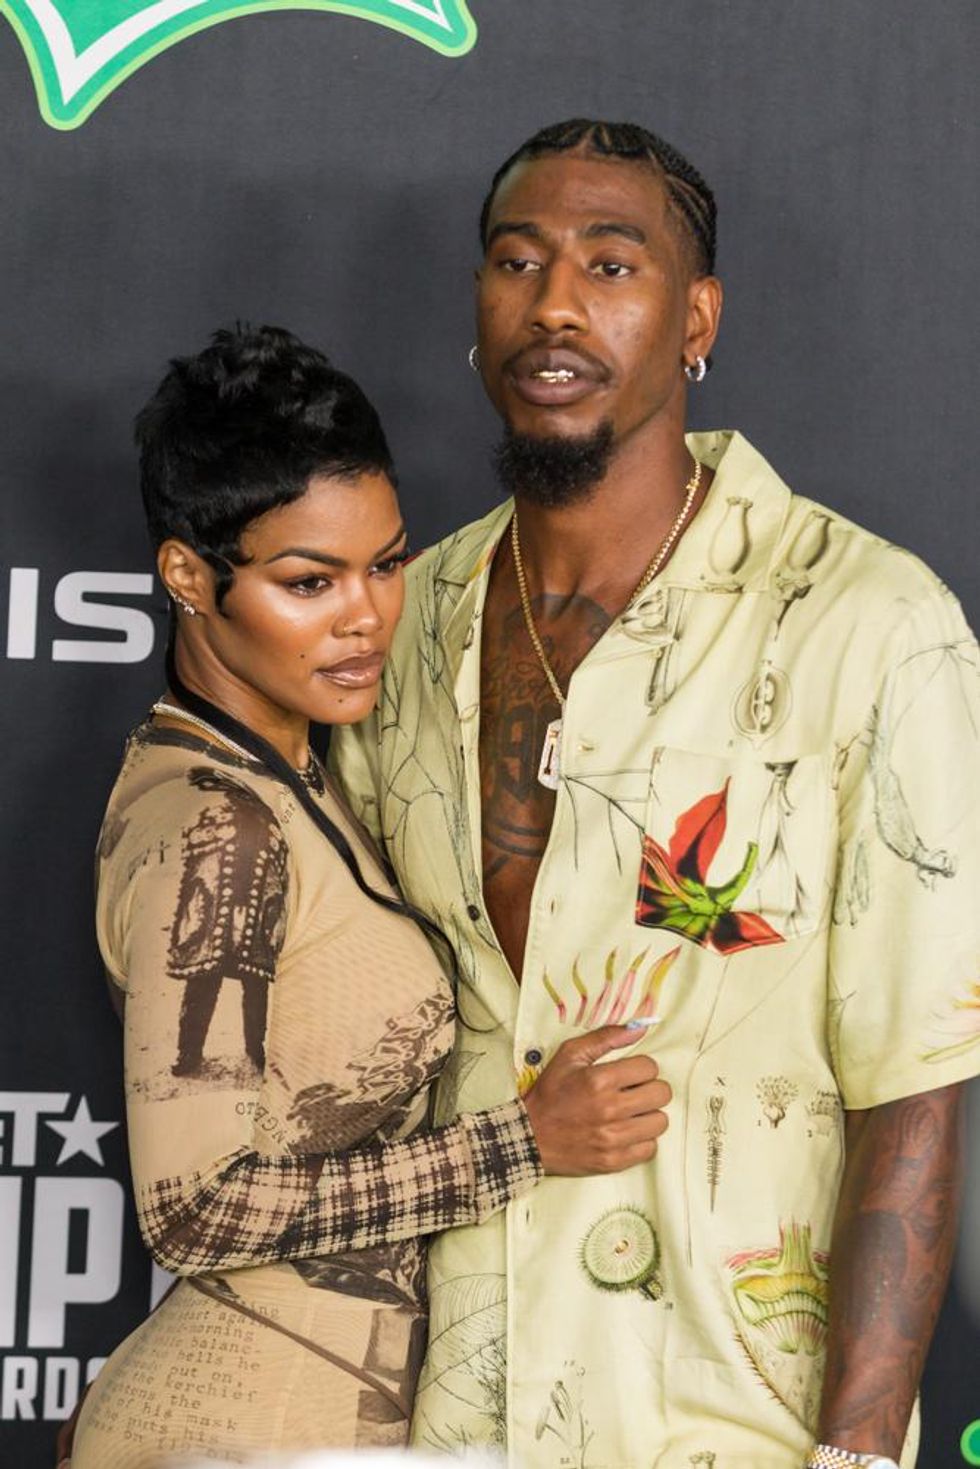 Who is Teyana Taylor and who is she married to?